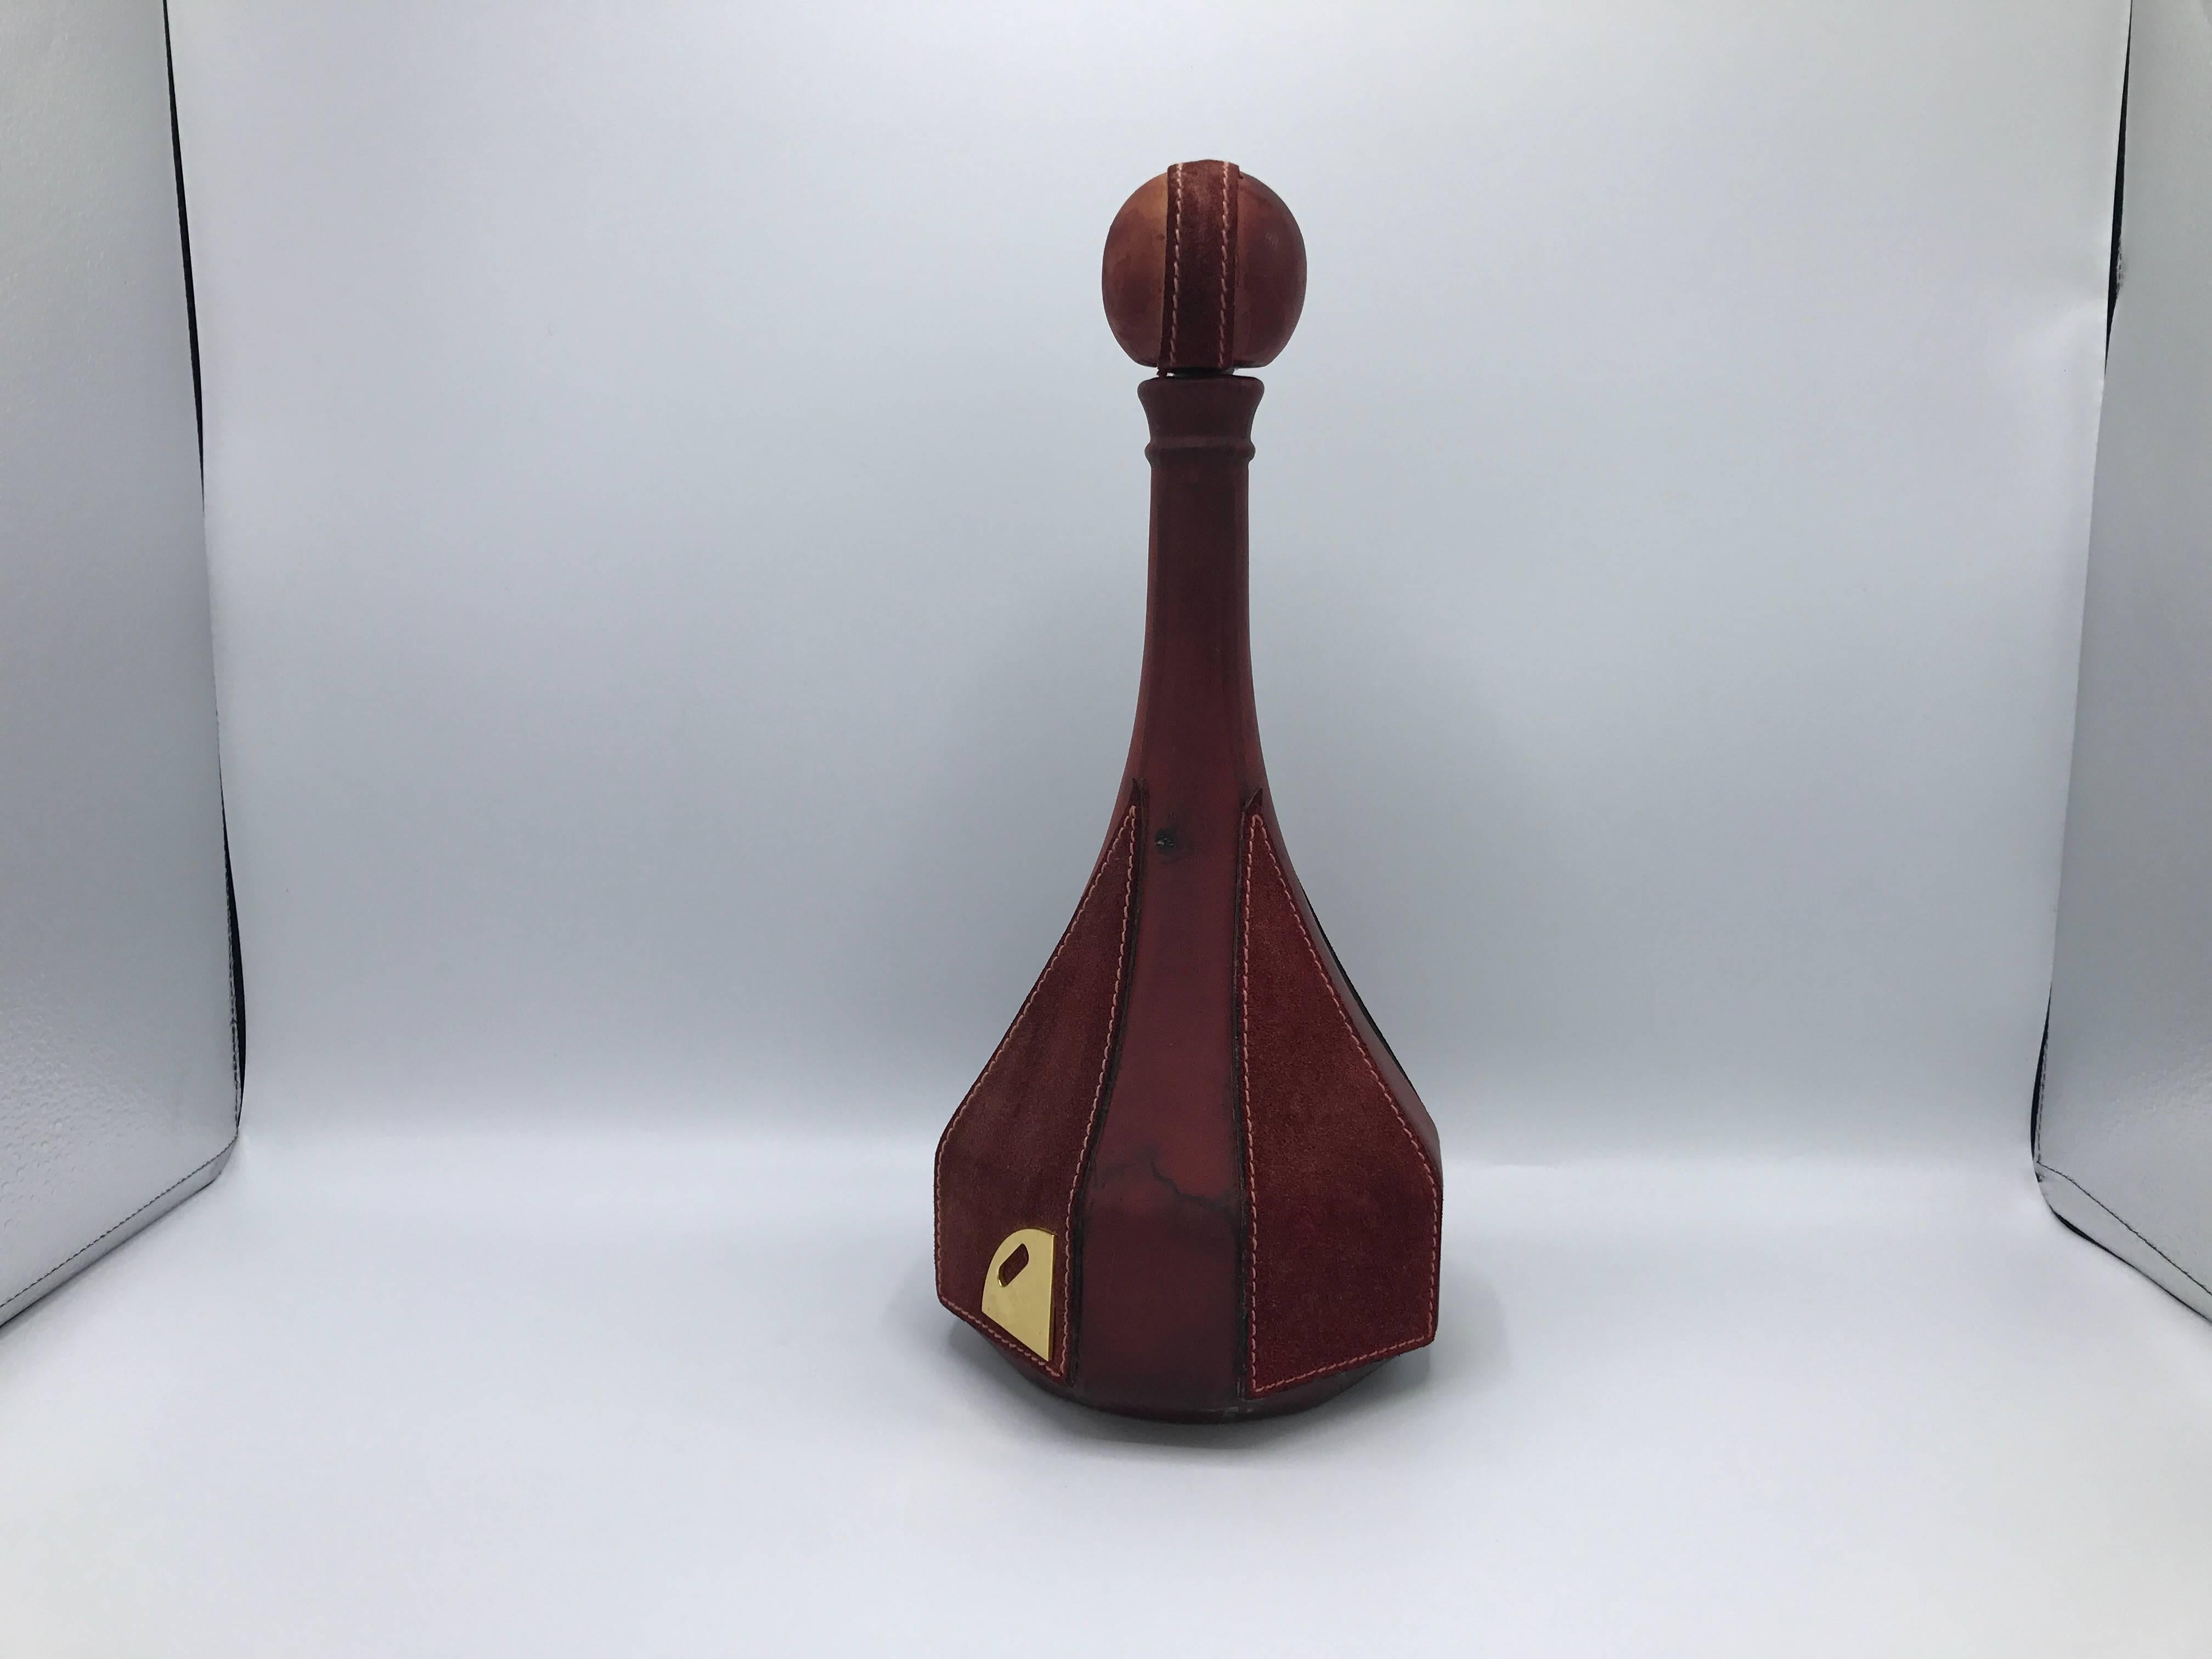 Offered is a modern and sophisticated, 1970s Italian red leather and suede decanter. Marked on brass plate, backside.